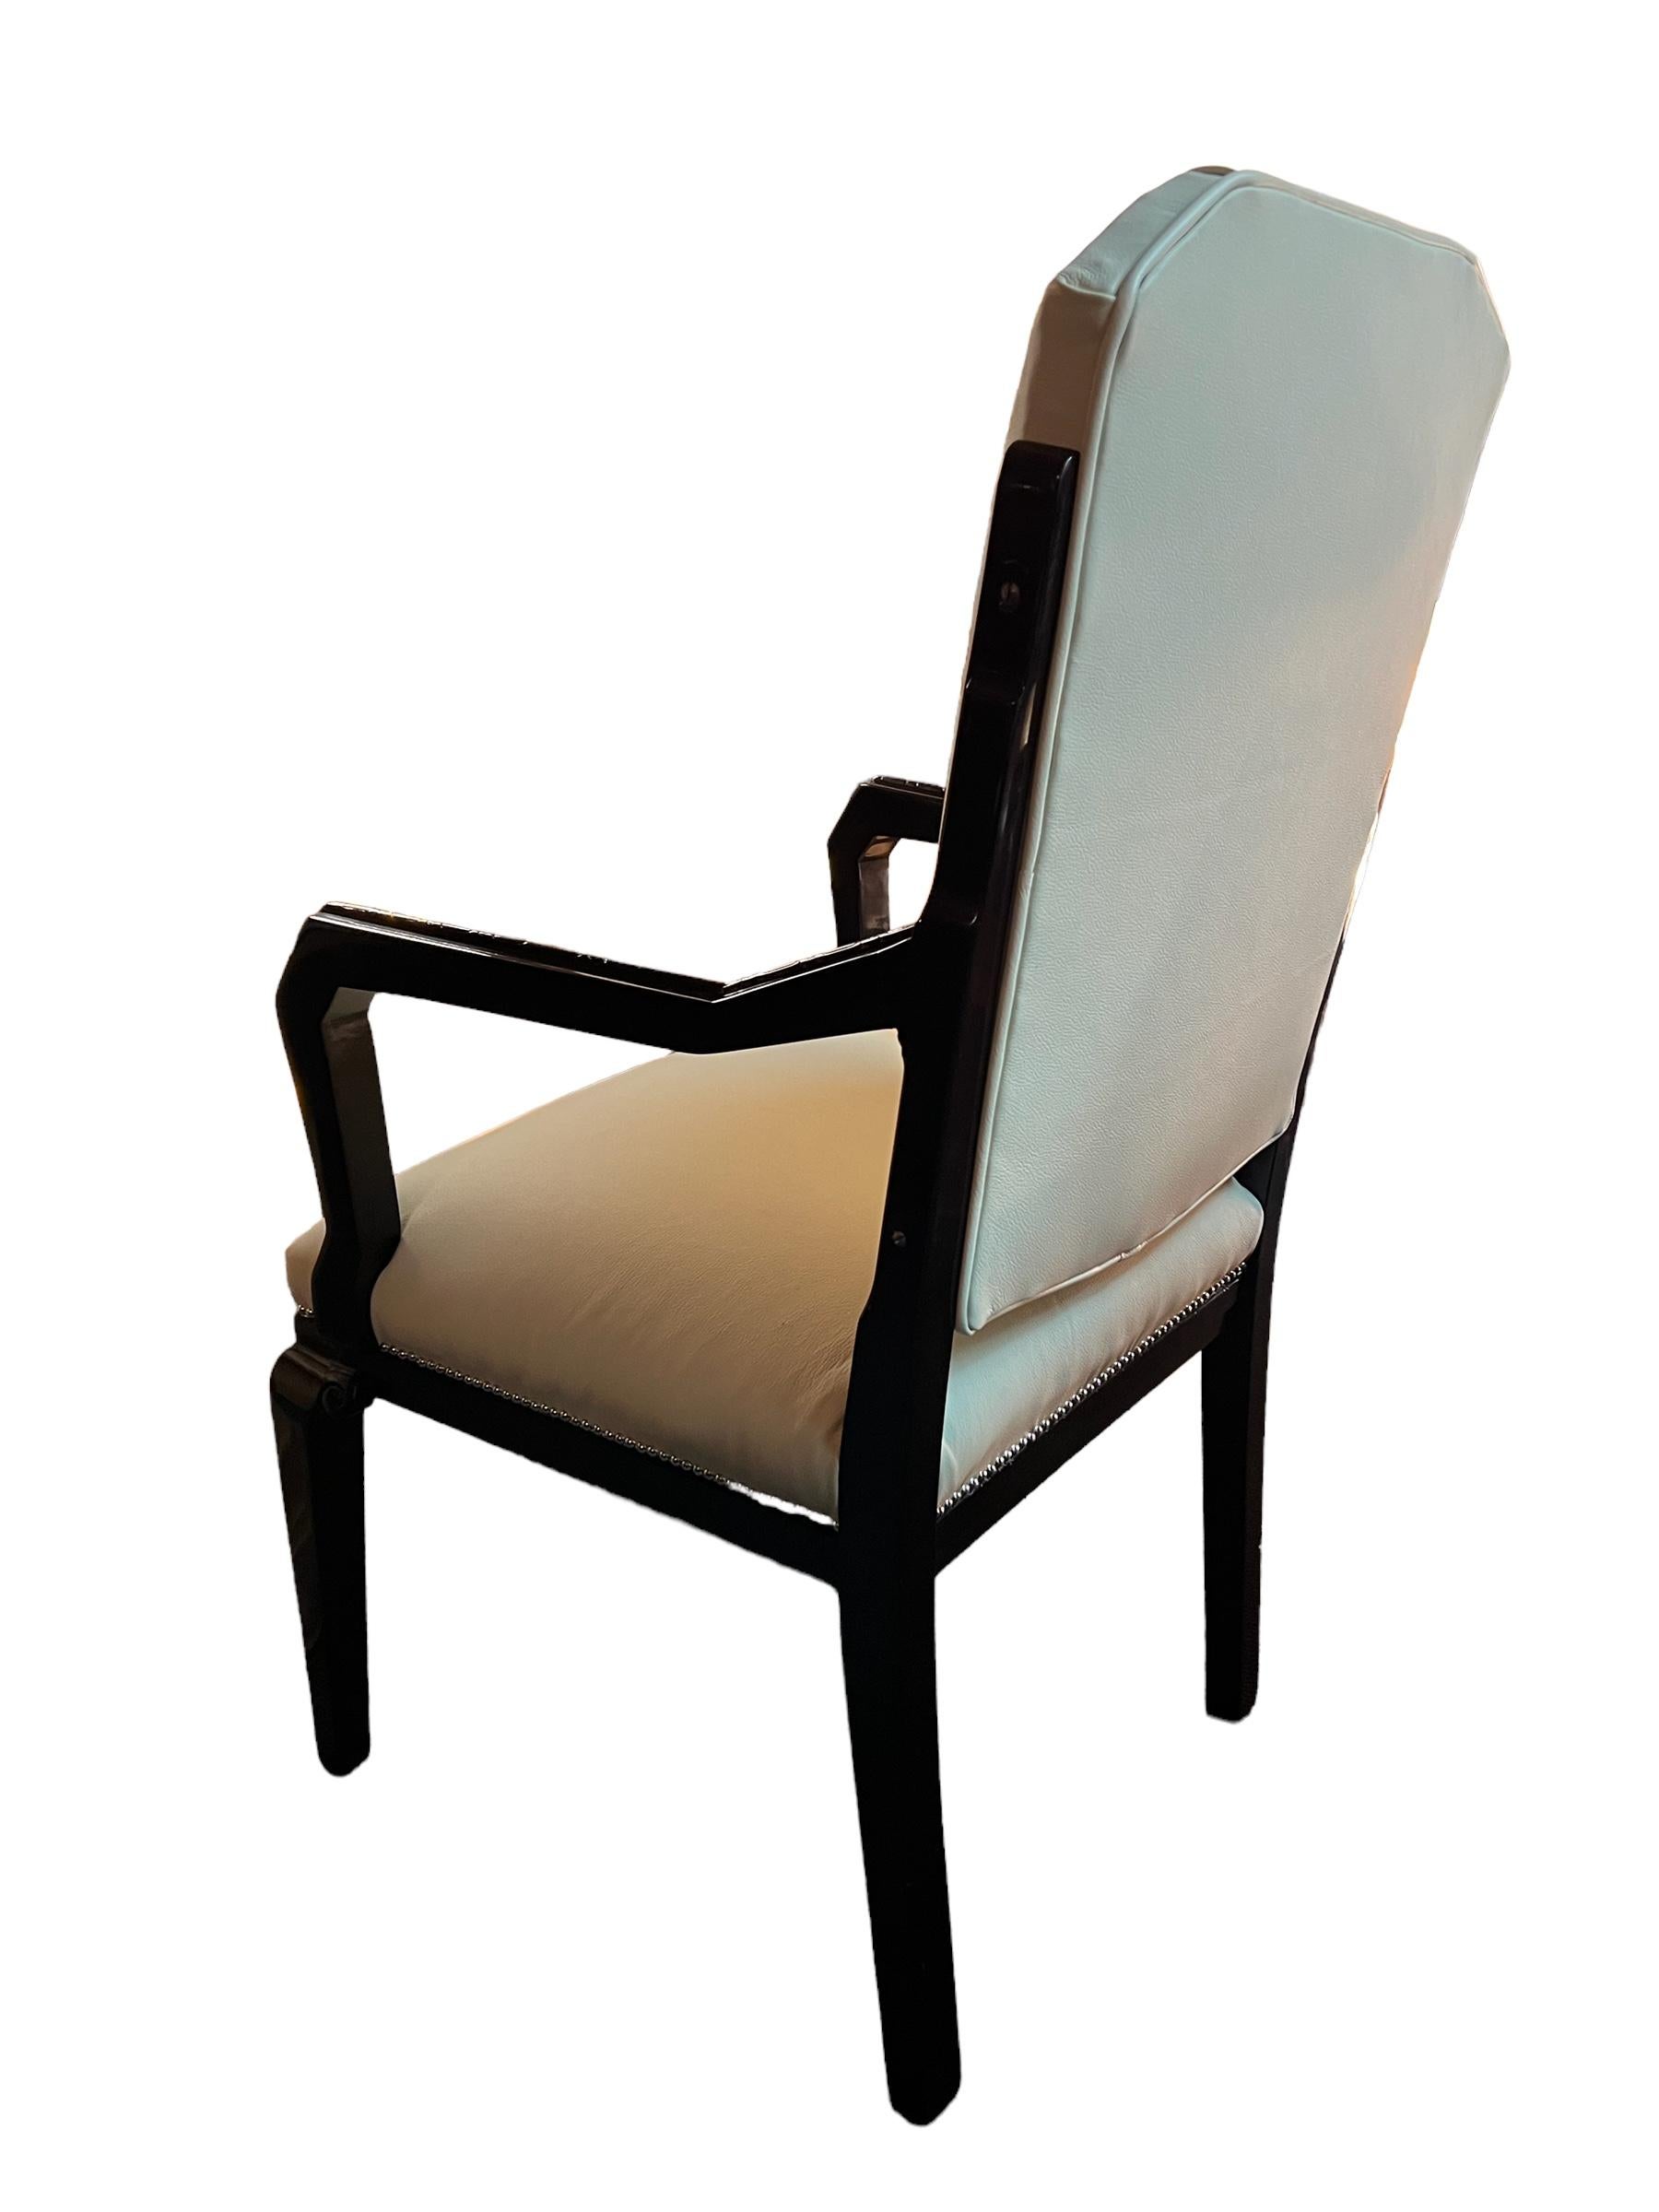 Desk Chair in Leather and Wood, Style: Art Deco, France, 1930 For Sale 3